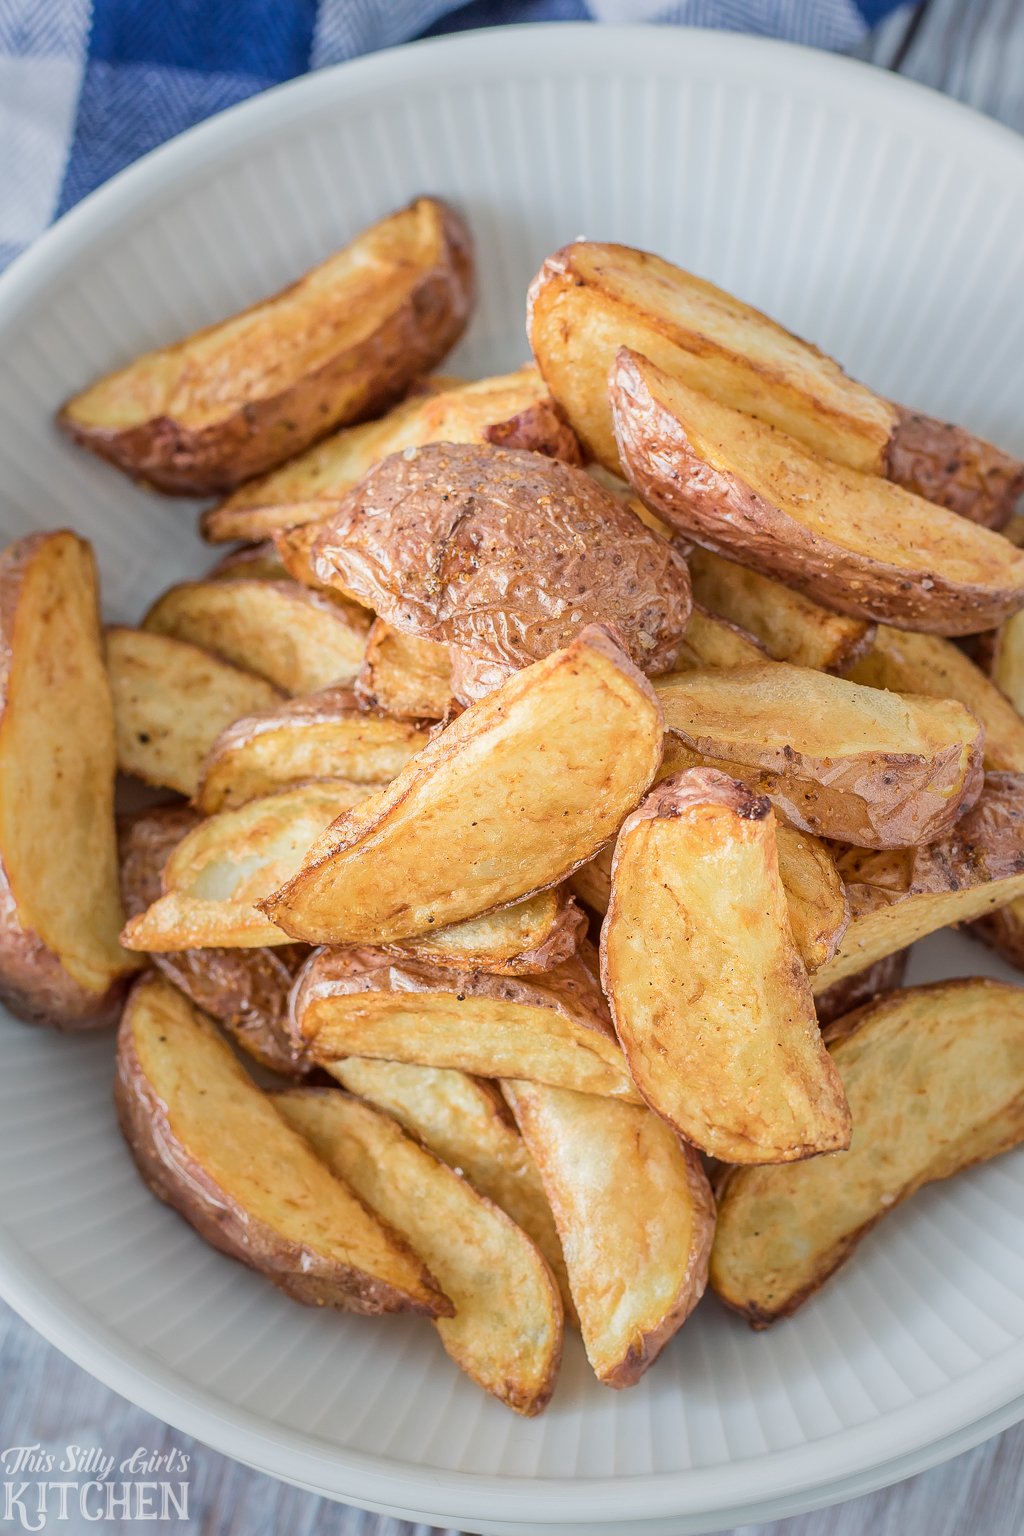 Fried Red Potato Wedges How To Fry Potatoes In Under 15 Minutes,How Much Money In Monopoly Game